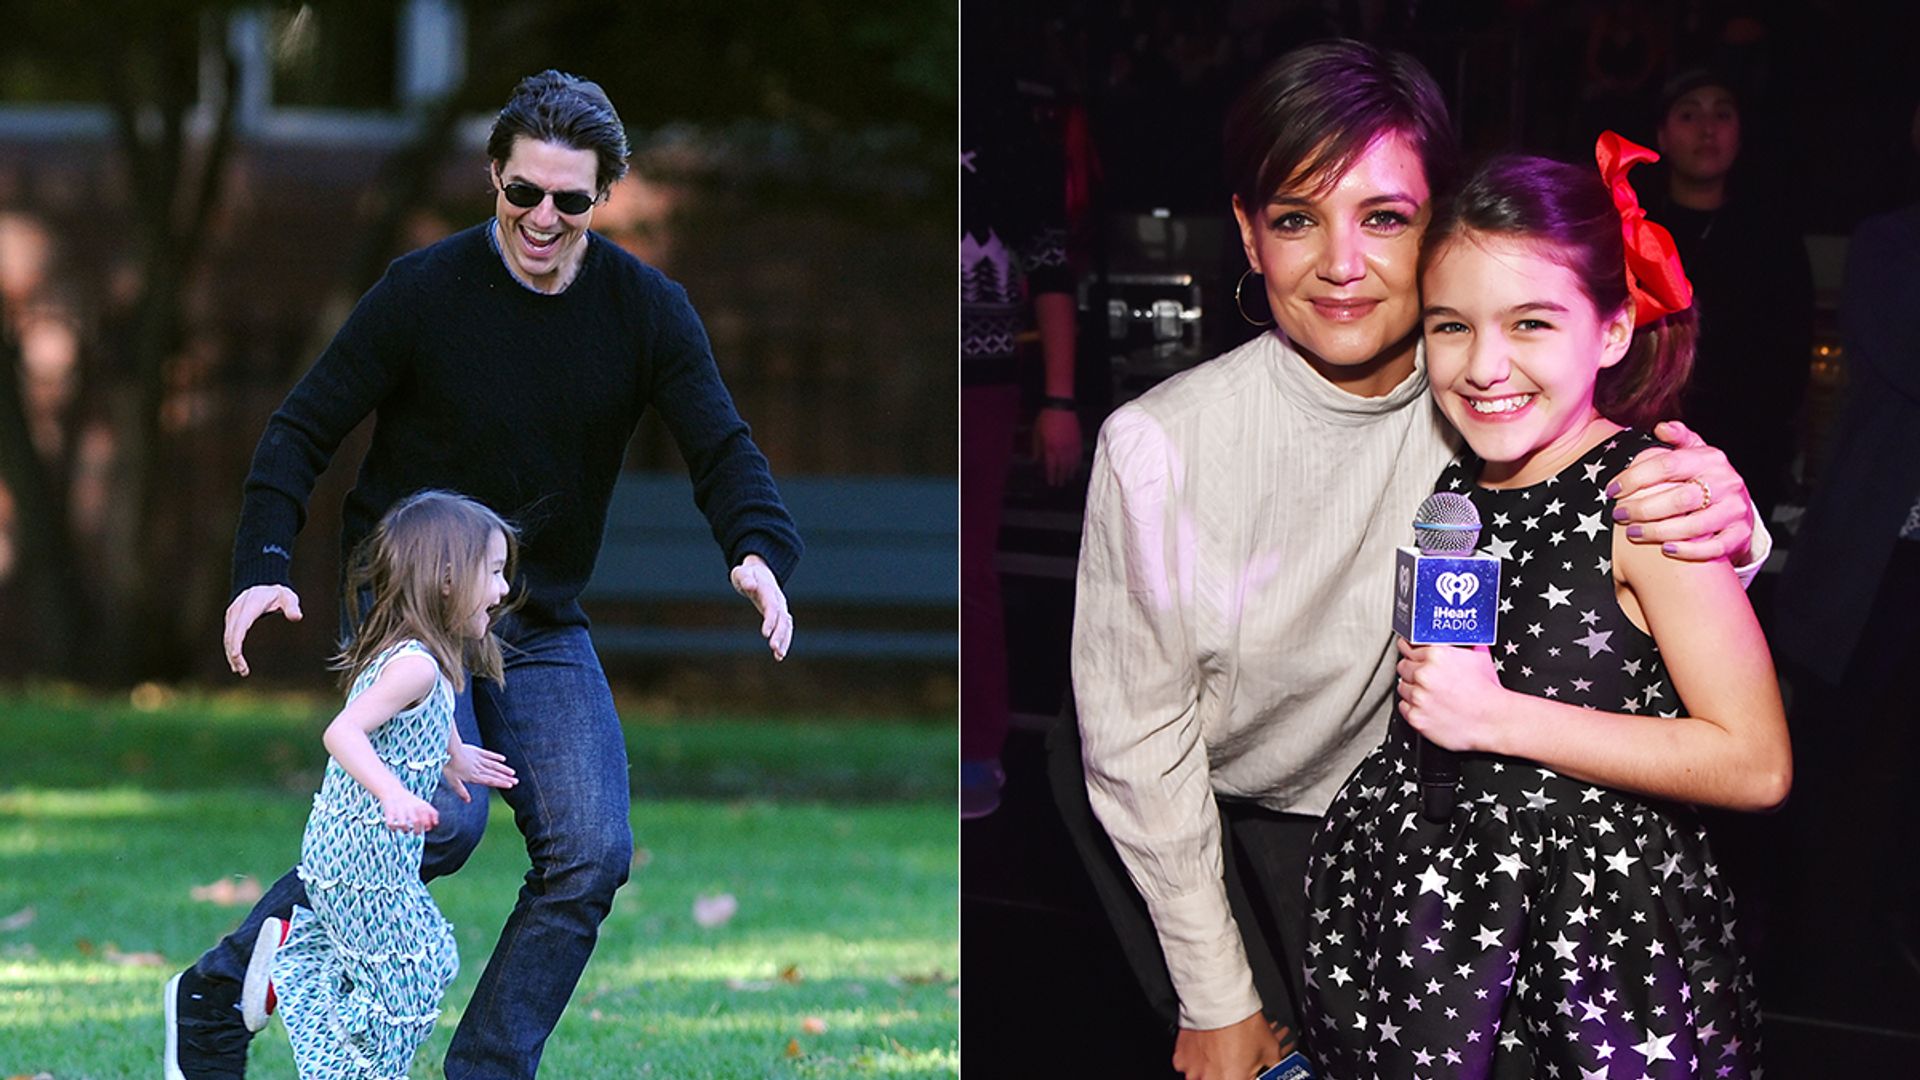 Suri Cruise with her parents Tom Cruise and Katie Holmes